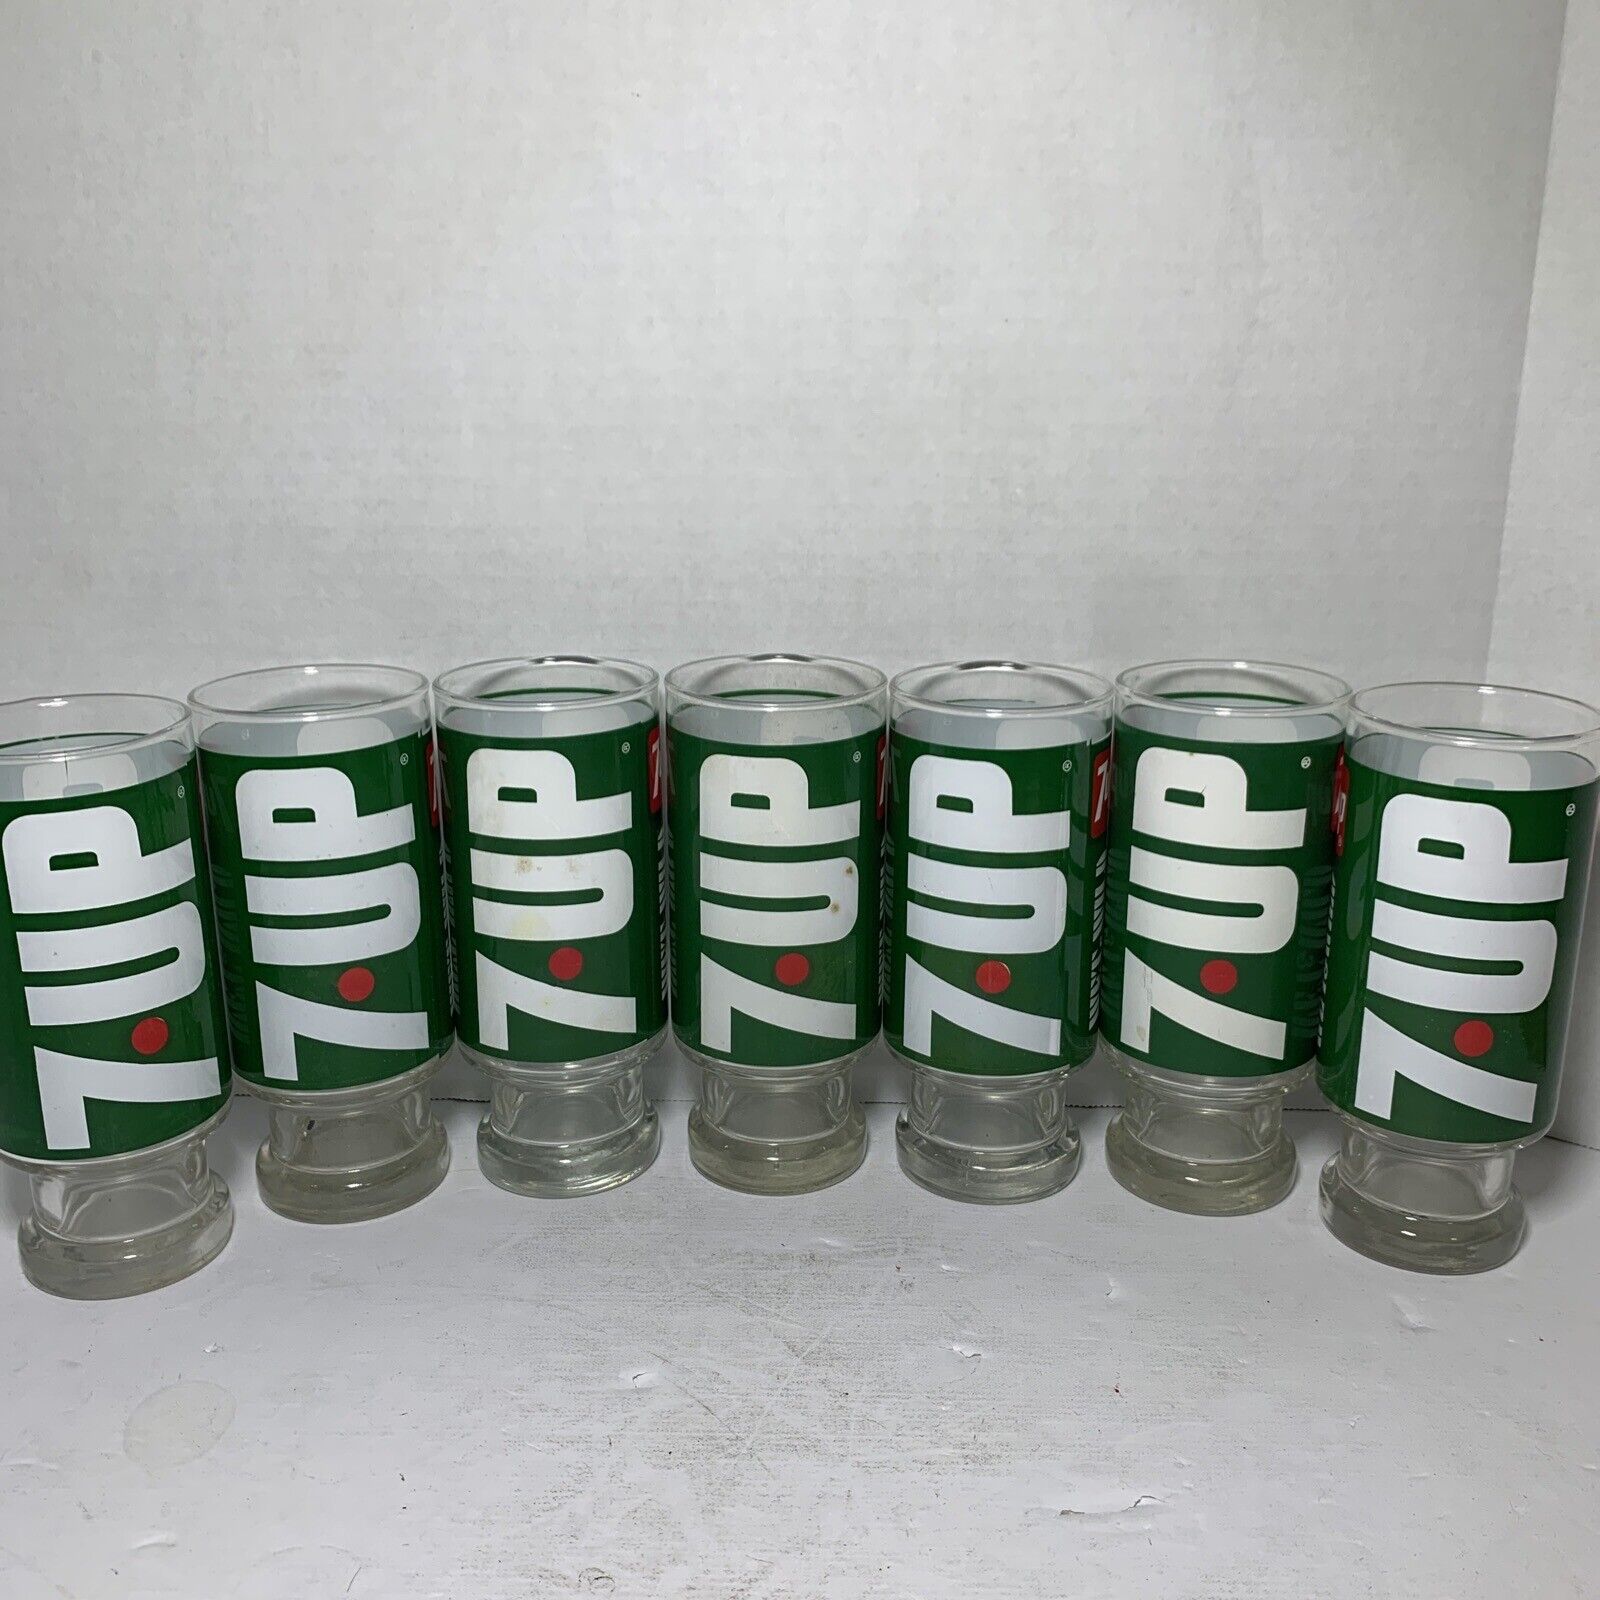 Wet & Wild - 7 UP - The Uncola - Green - Soda Drinking Glass